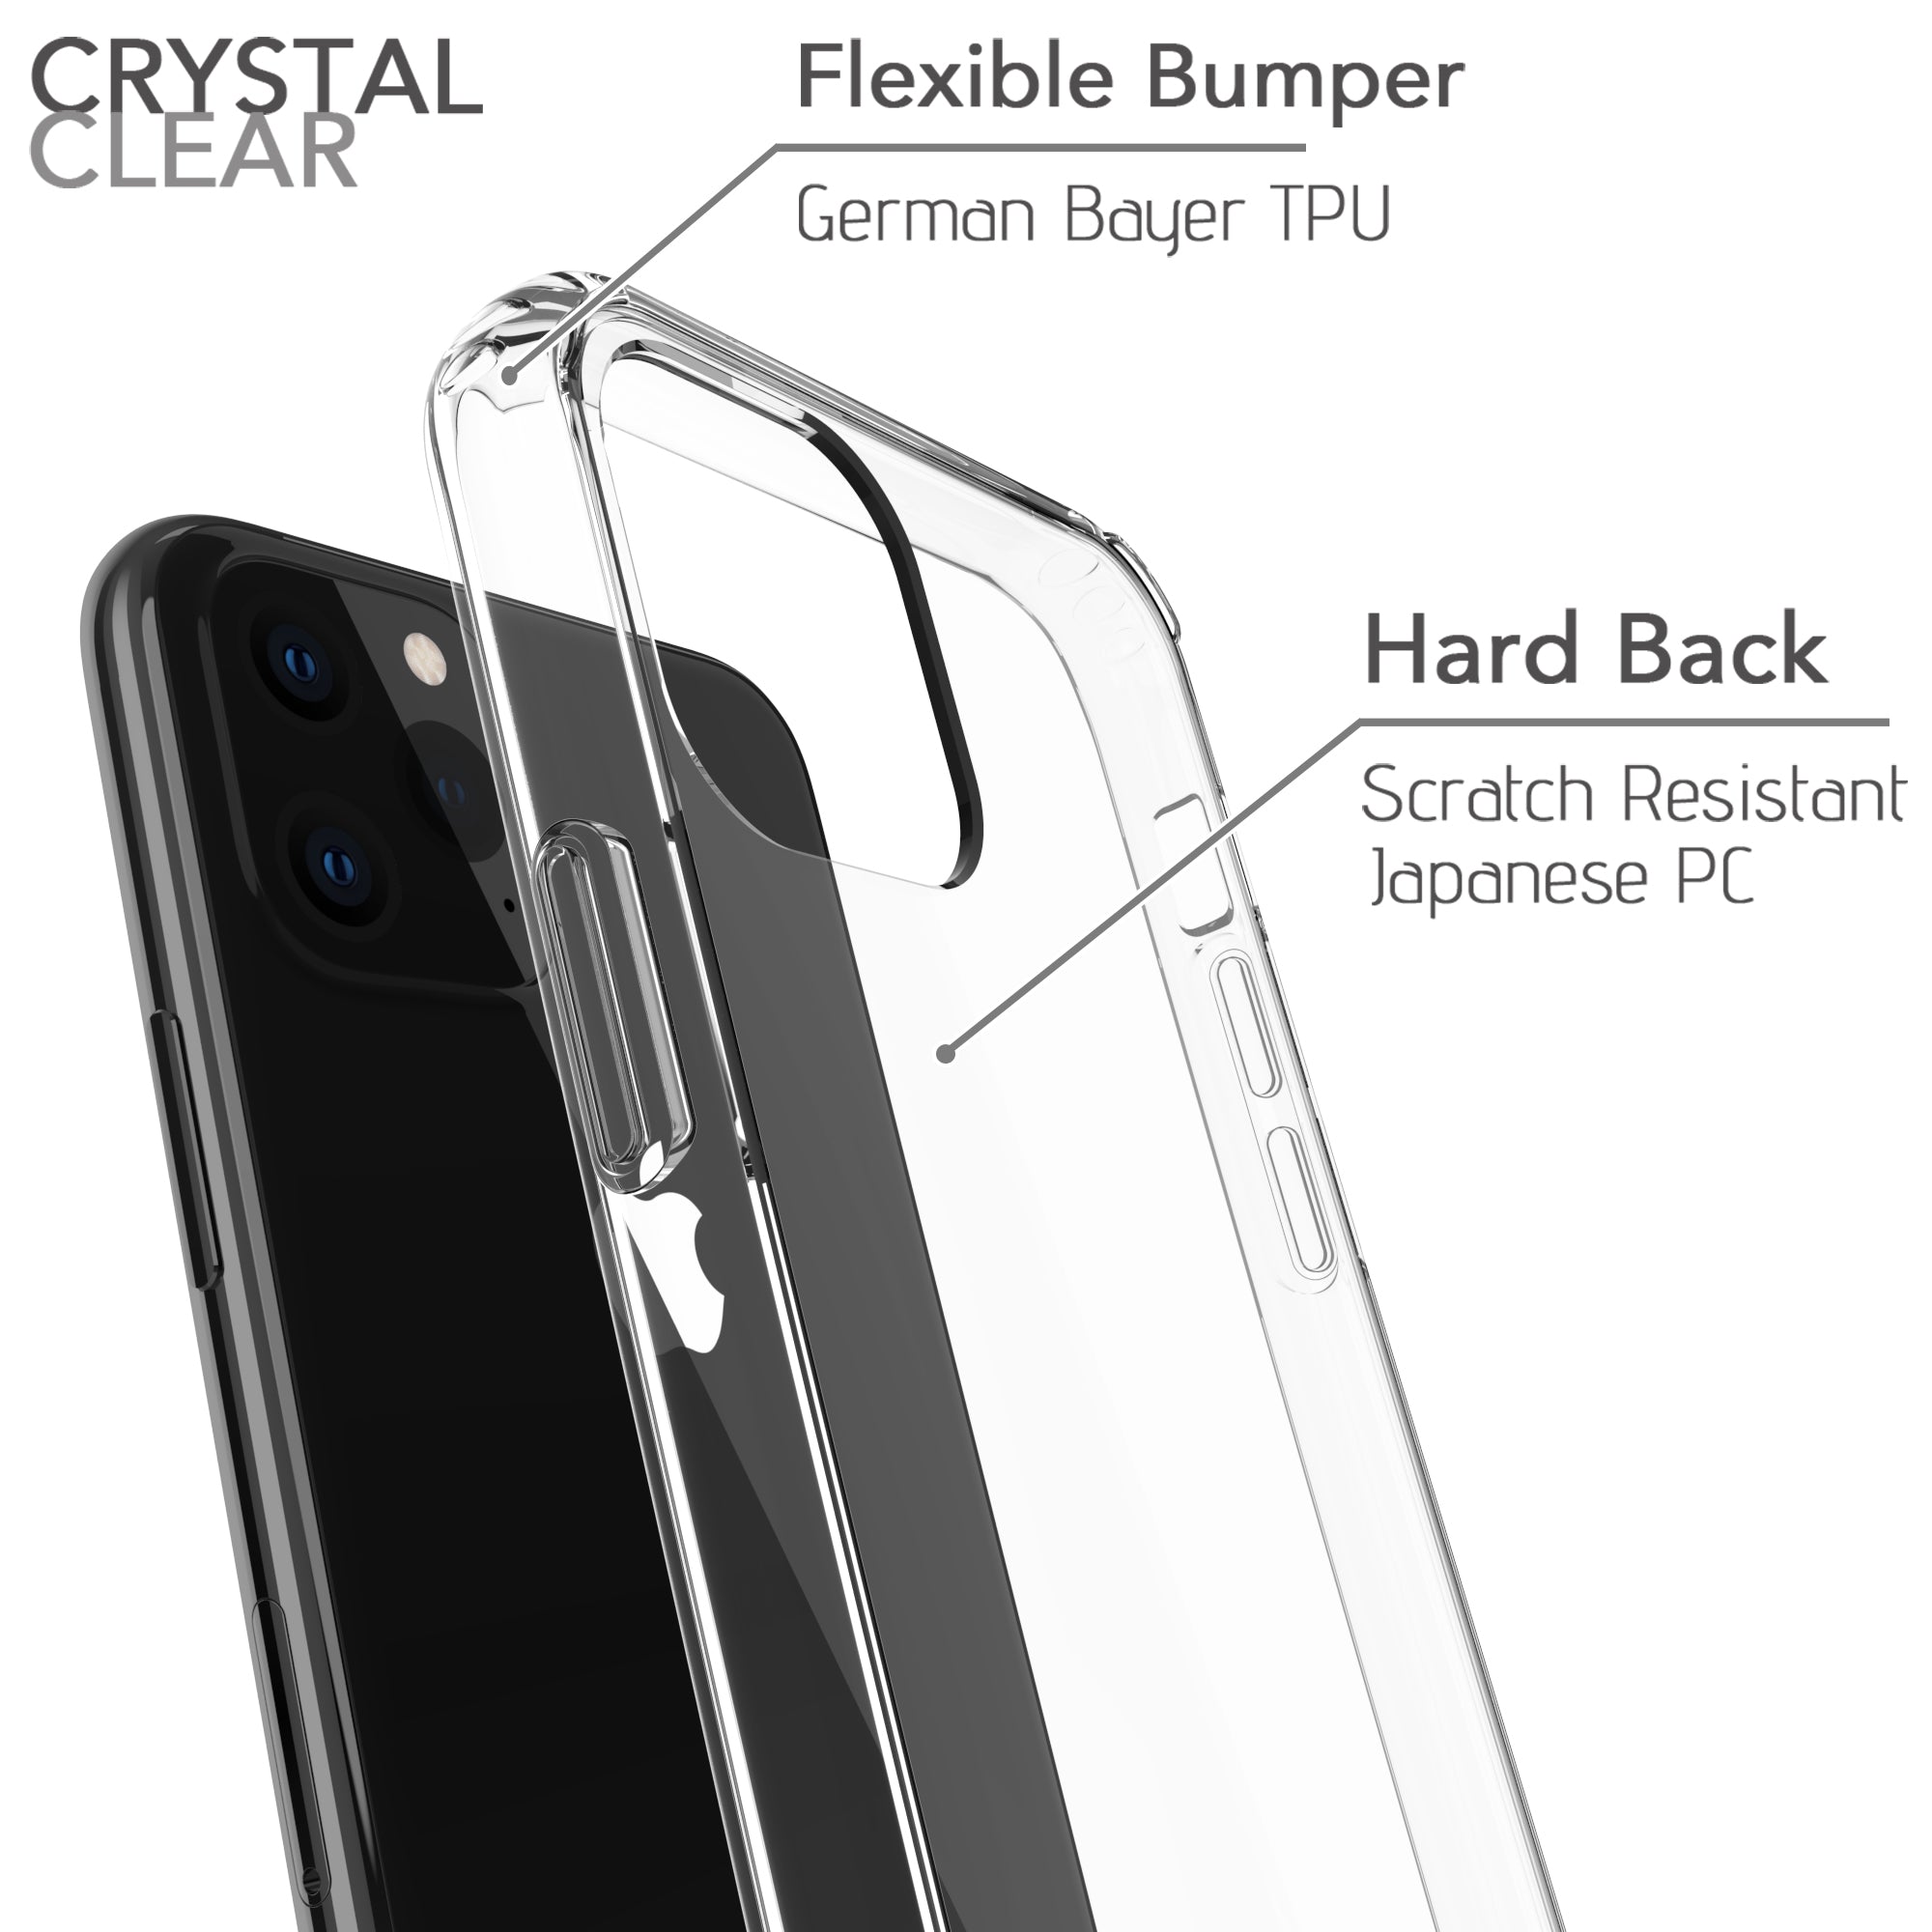 Luvvitt $250 Warranty CLEAR VIEW Case + Liquid Glass Screen Protector Bundle for iPhone 11 Pro 2019